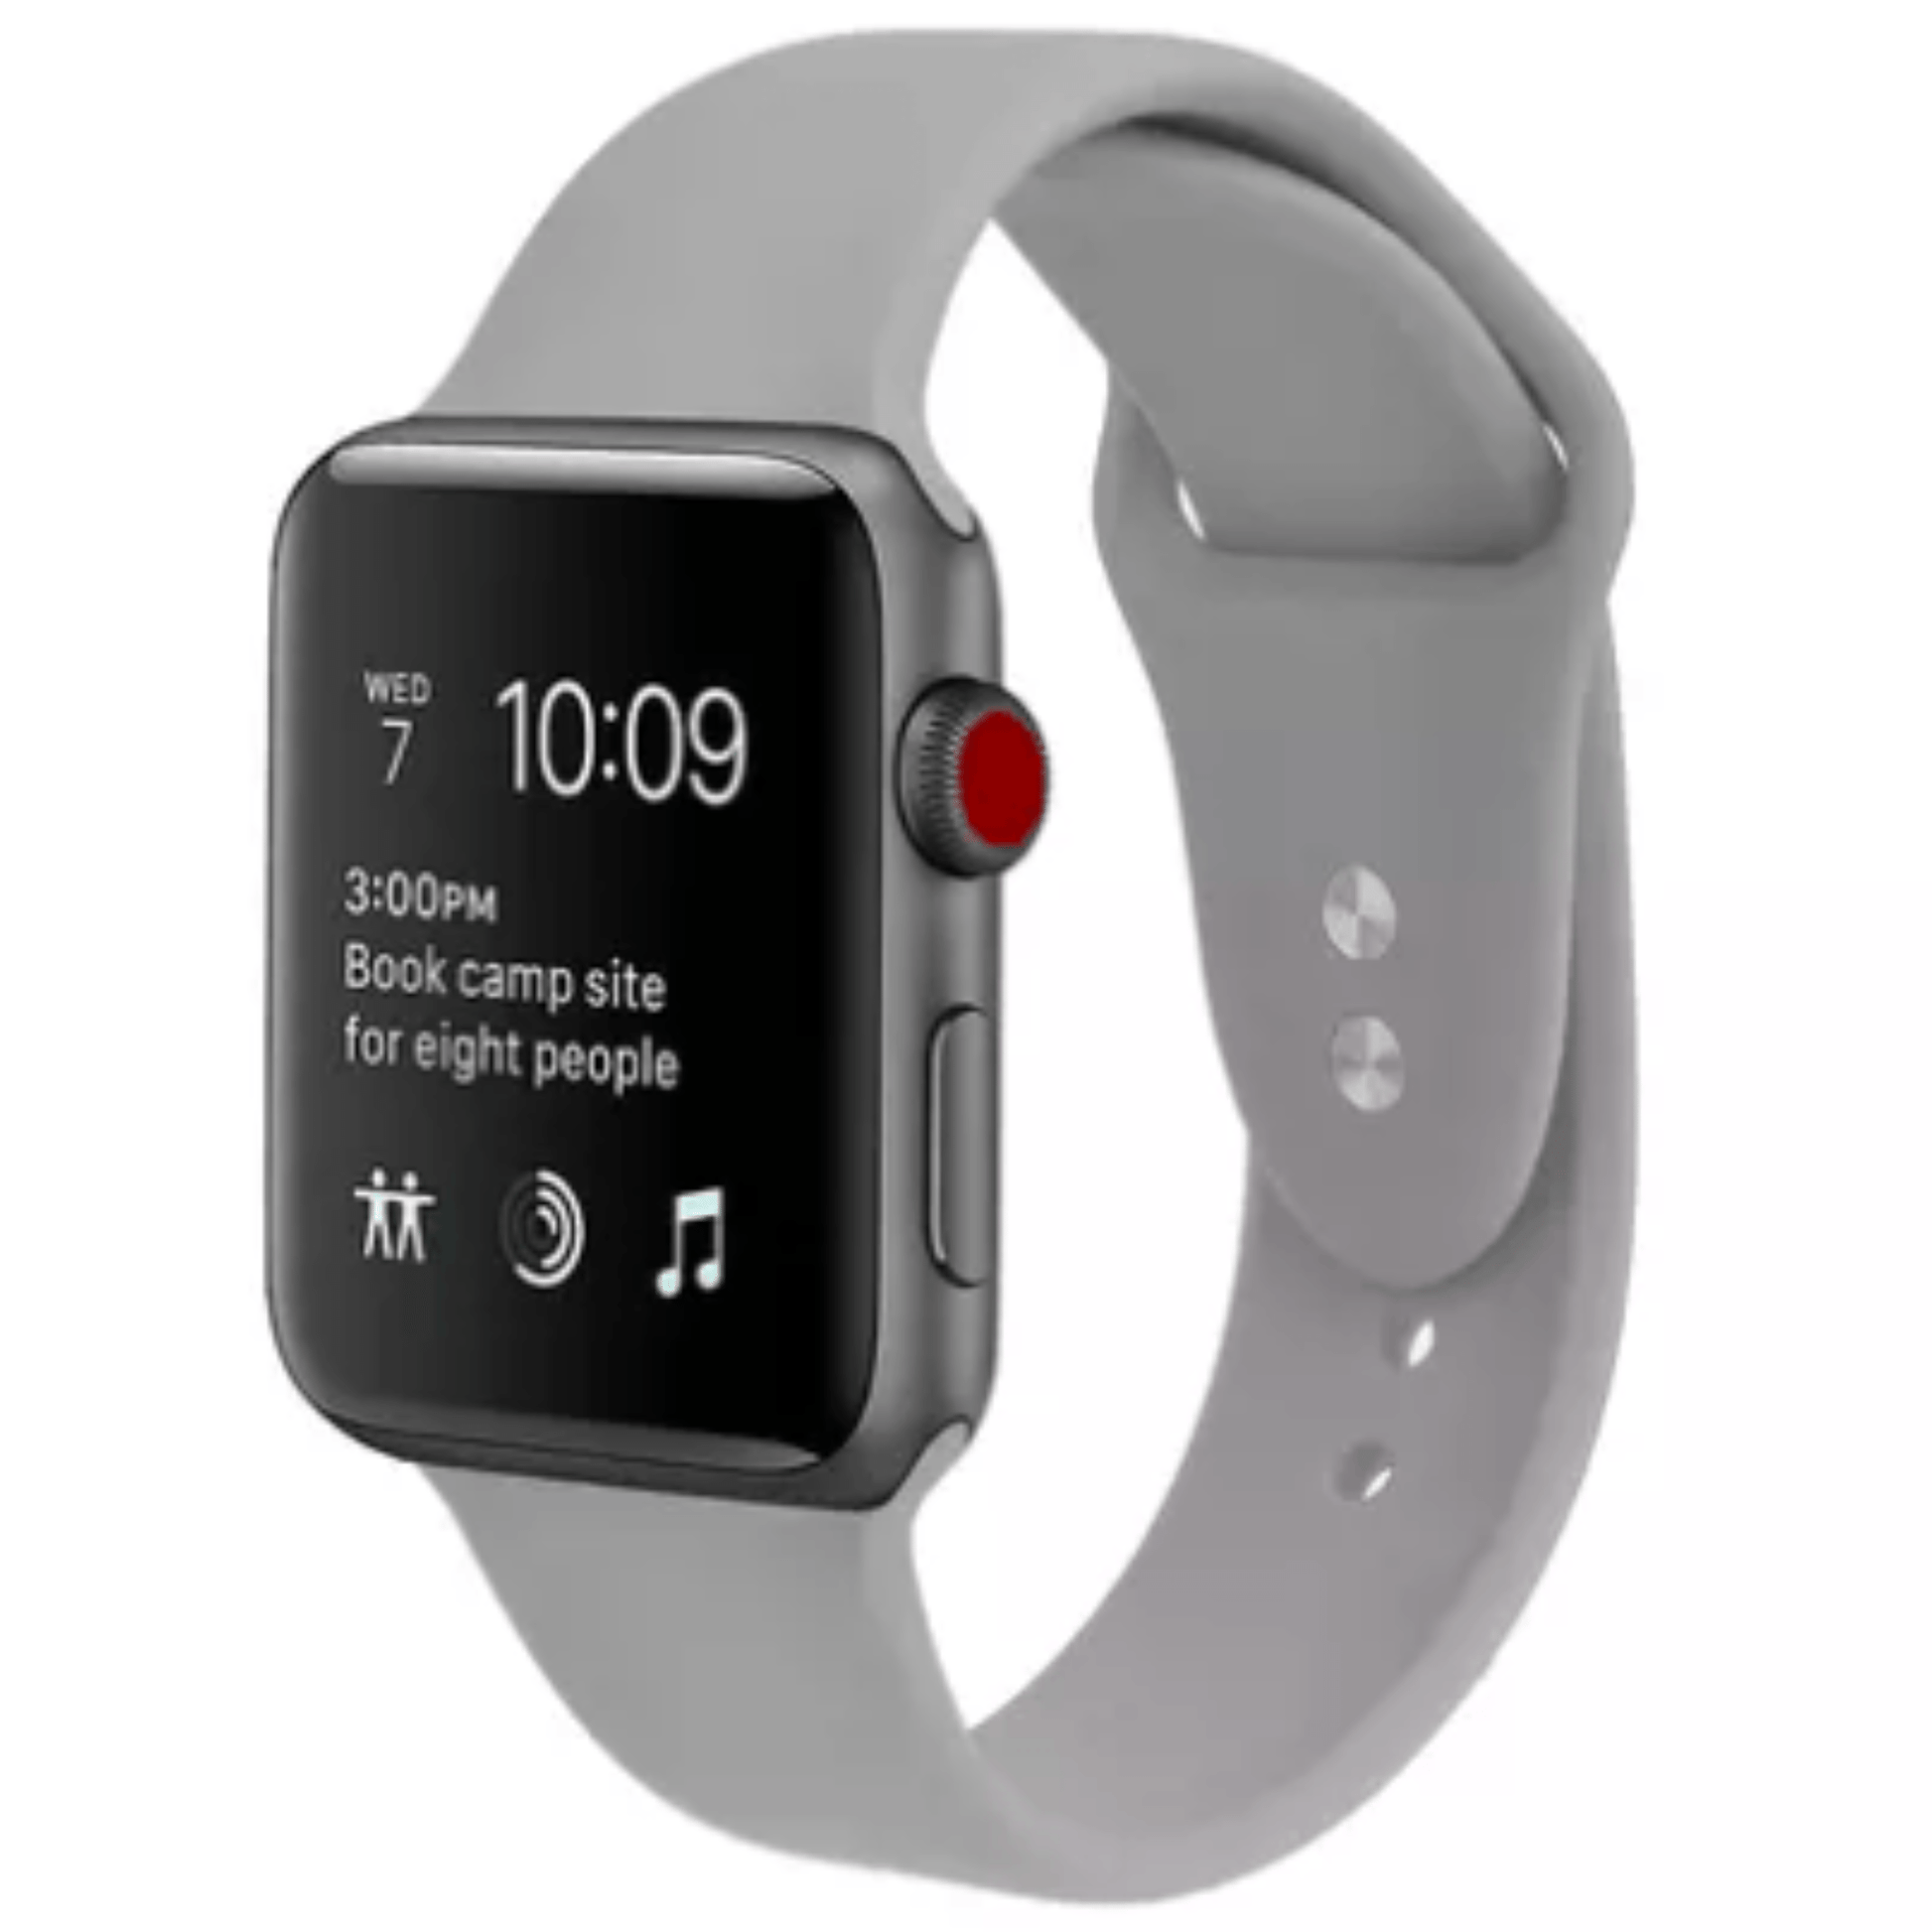 Silicone Sport Replacement Band for Apple Watch Light Gray Apple Watch Band Elements Watches